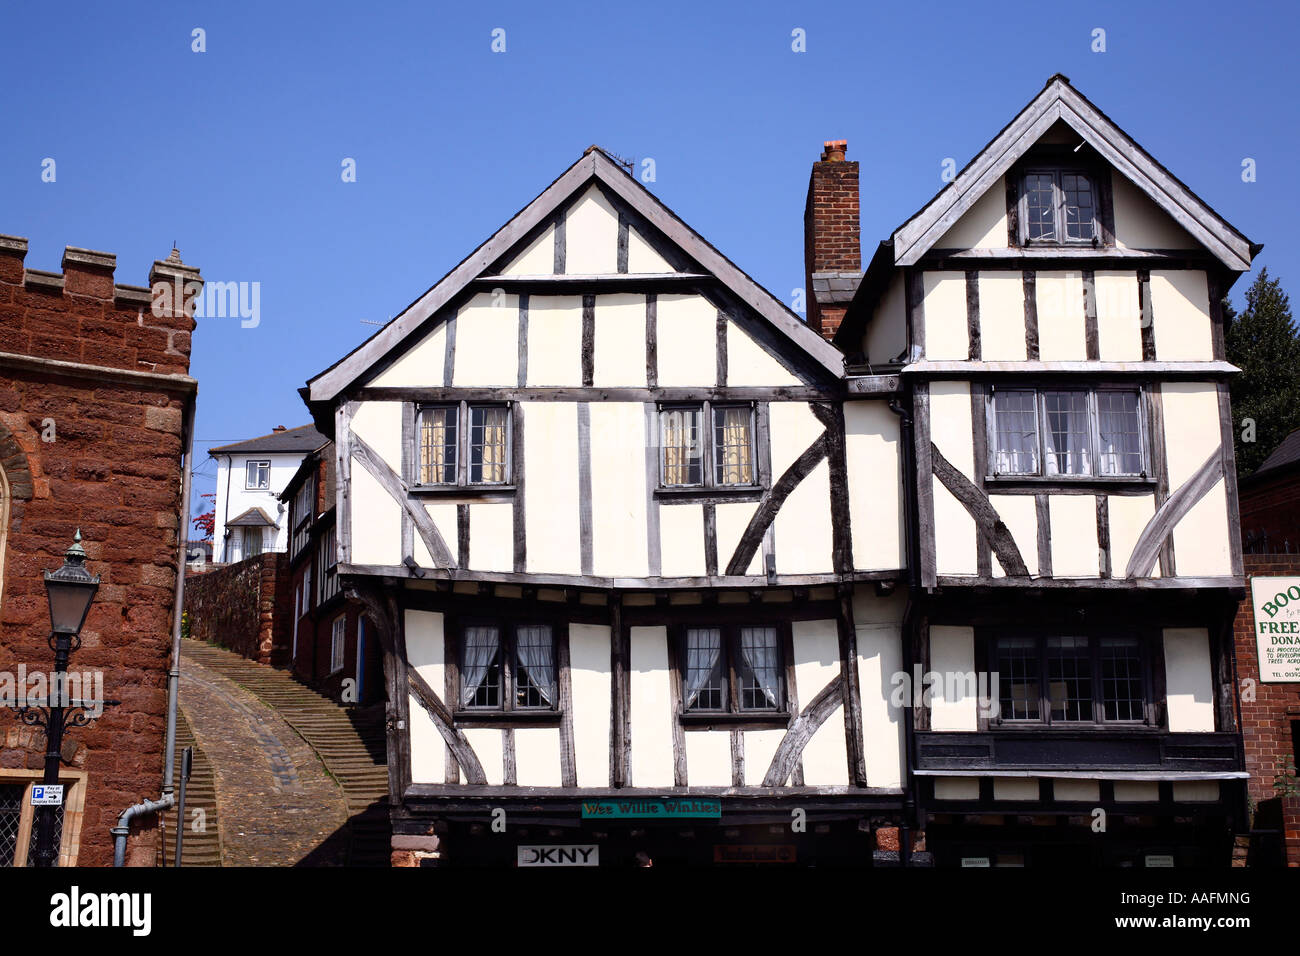 The House that Moved, Exeter, Devon, England Stock Photo